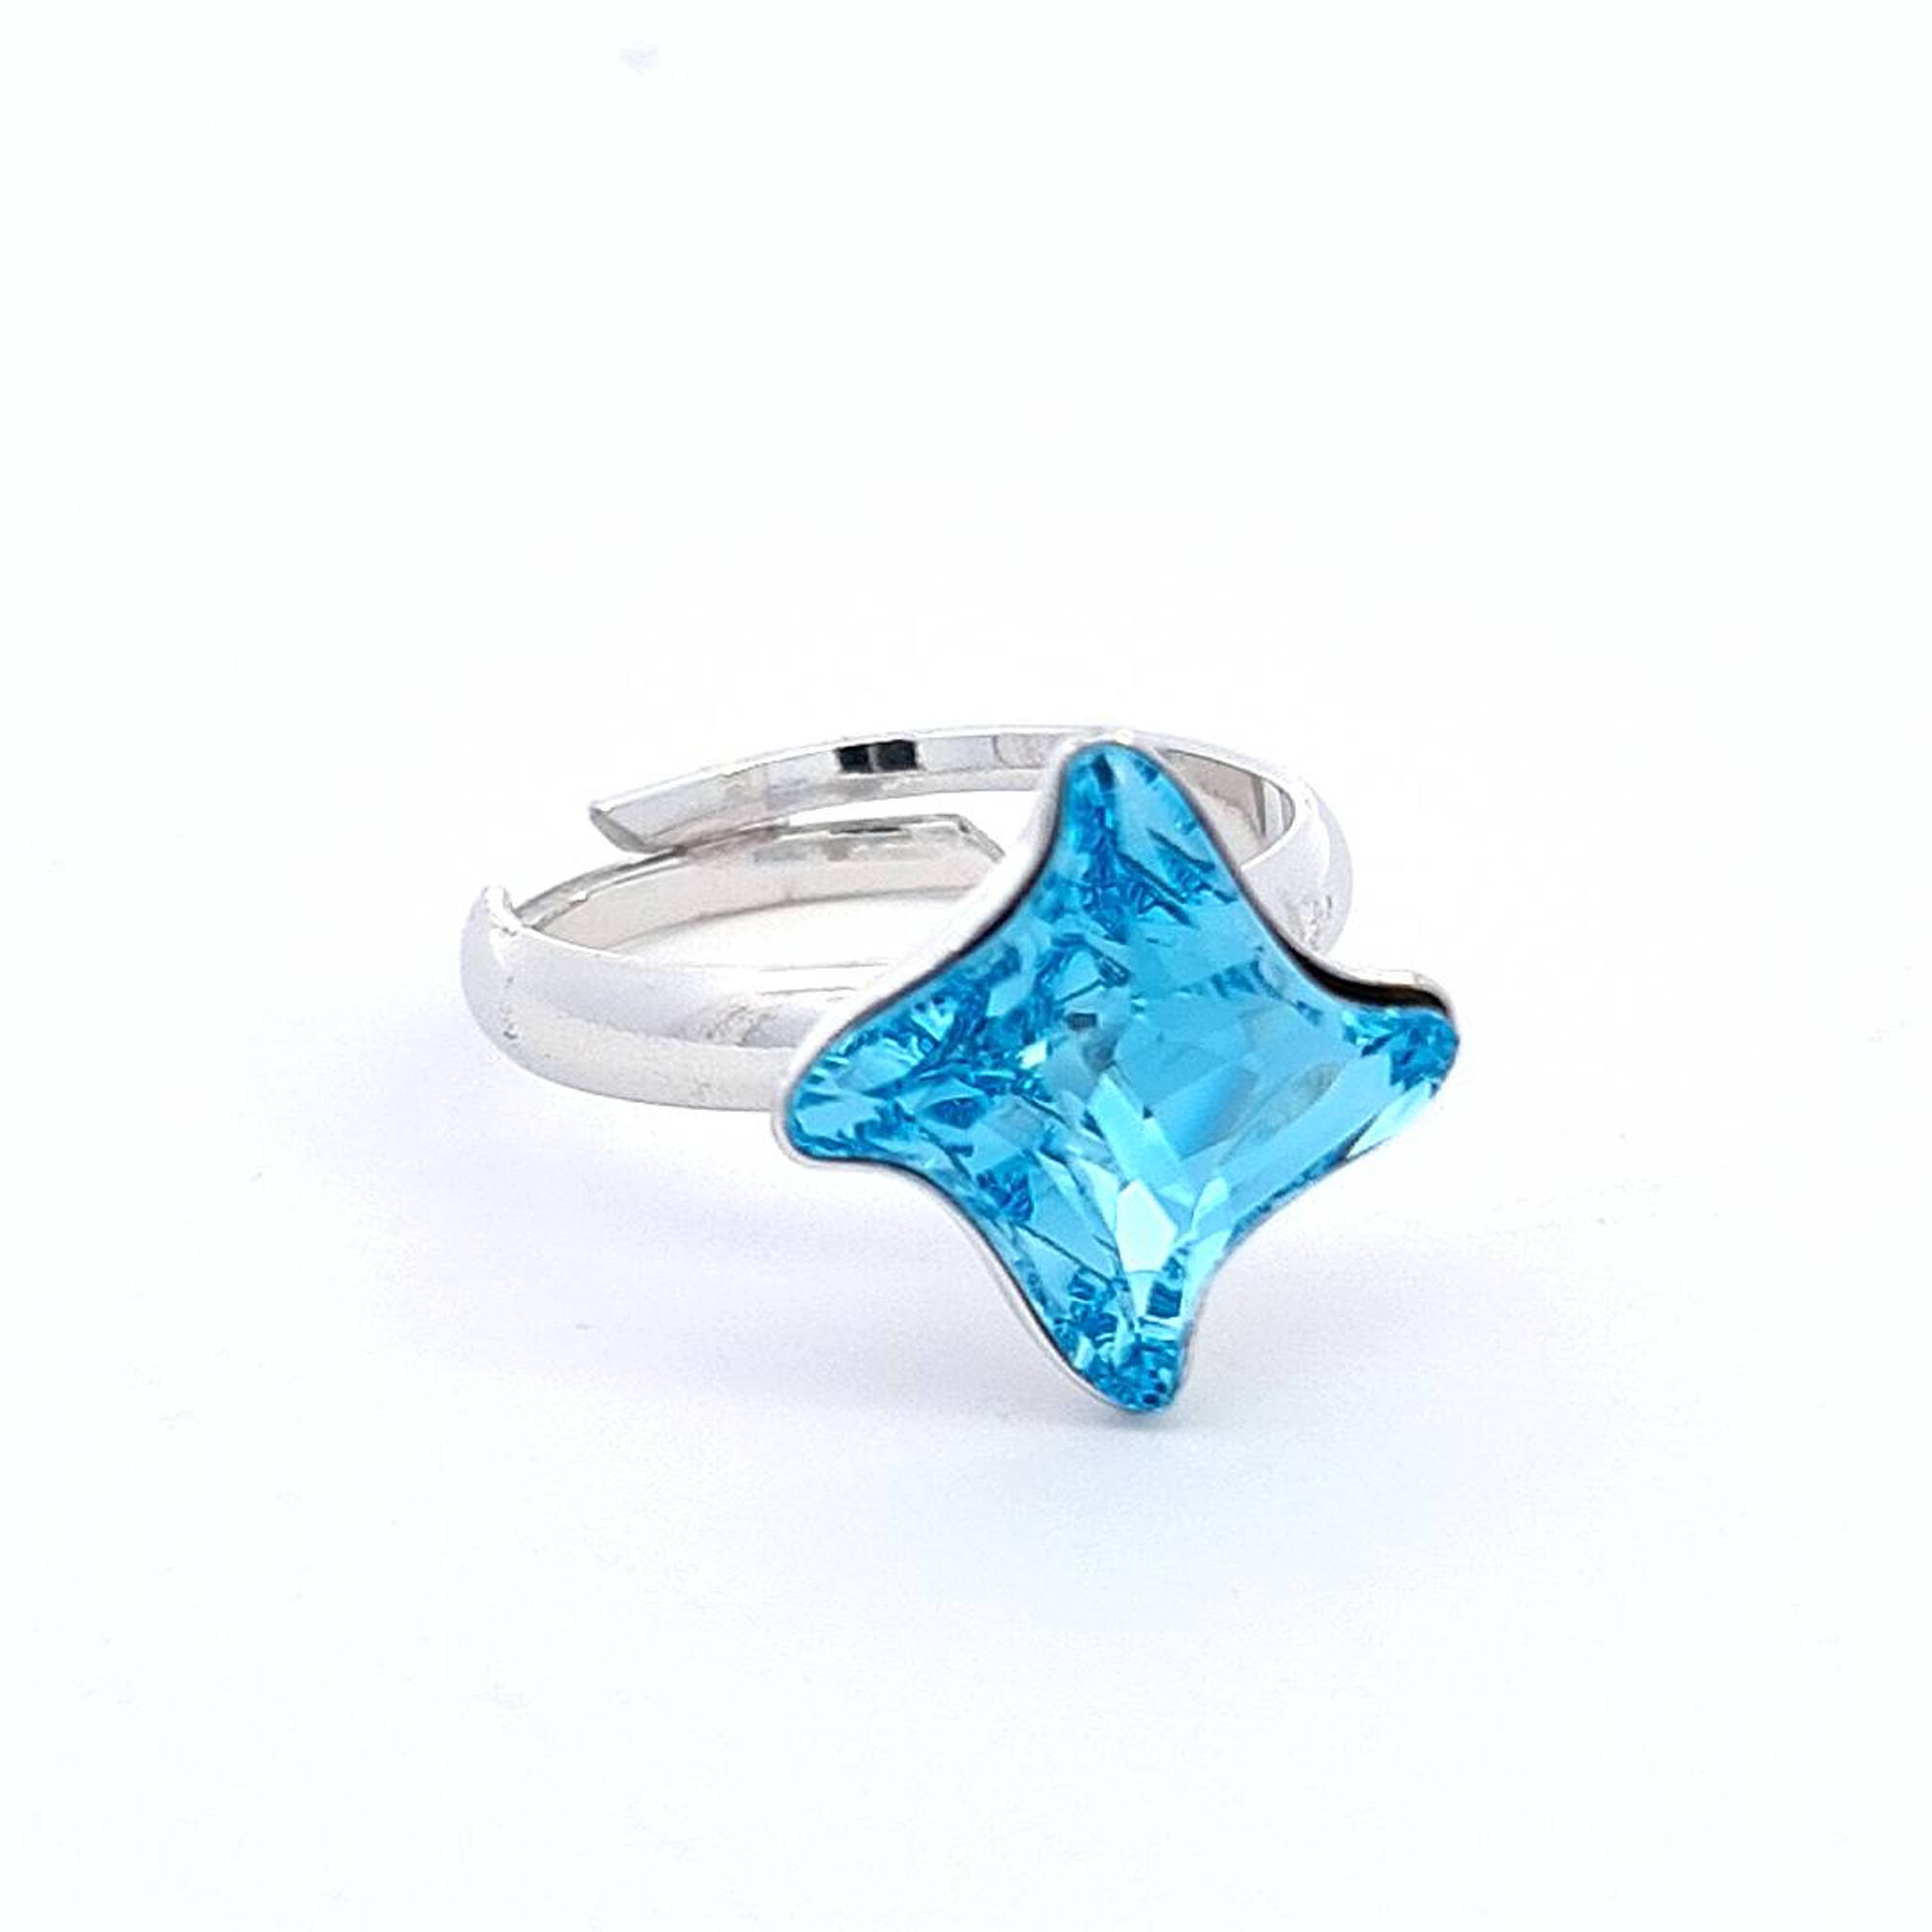 Aquamarine Solitaire Ring in Silver - Twister Sky